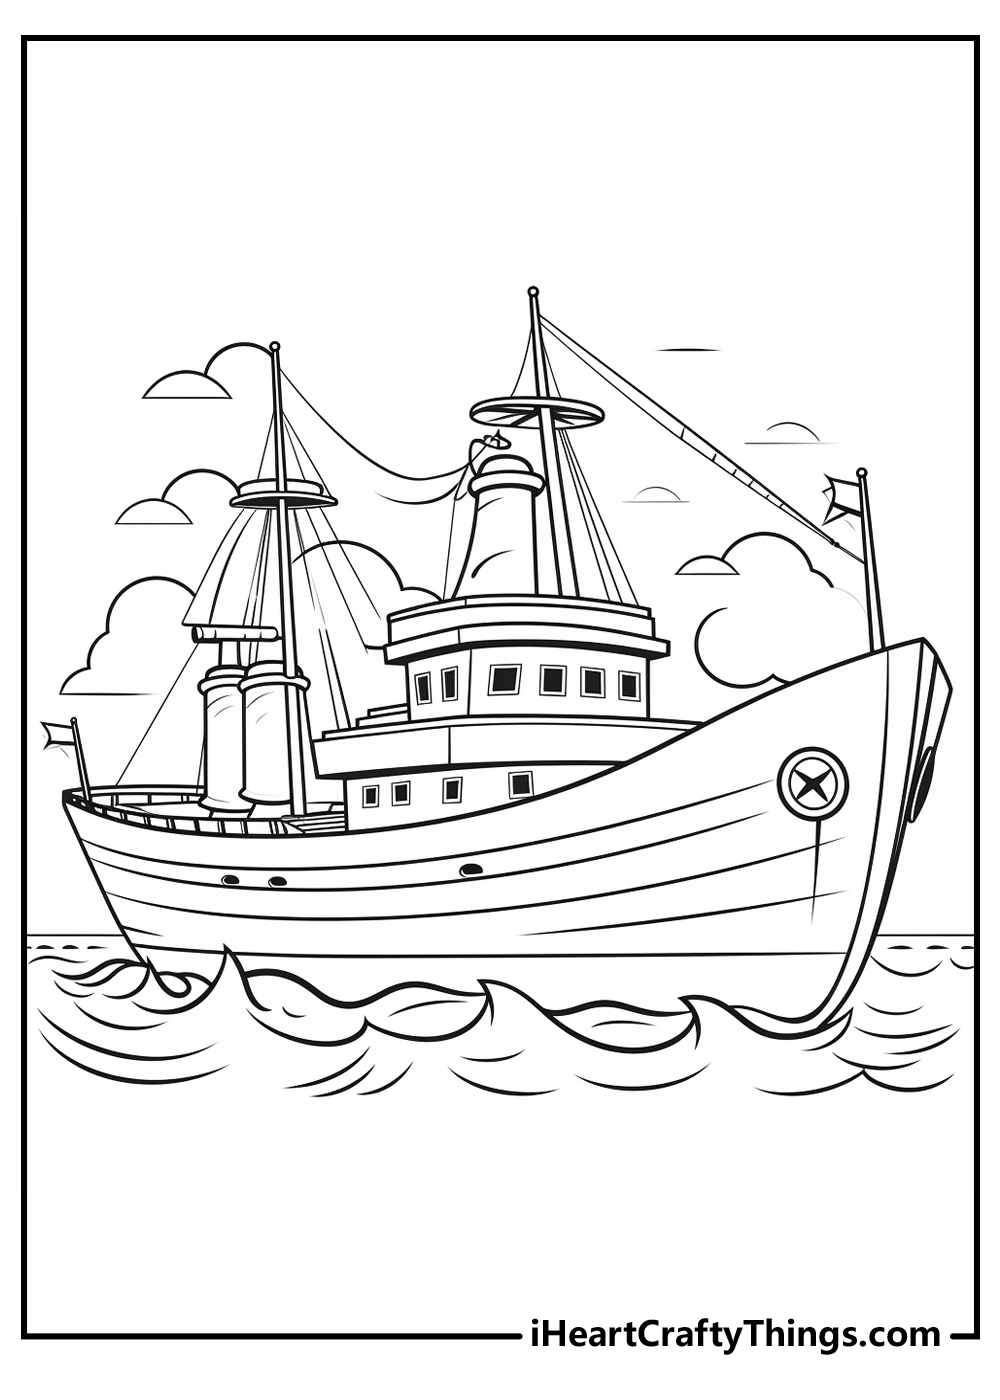 Boats Coloring Pages for Kids